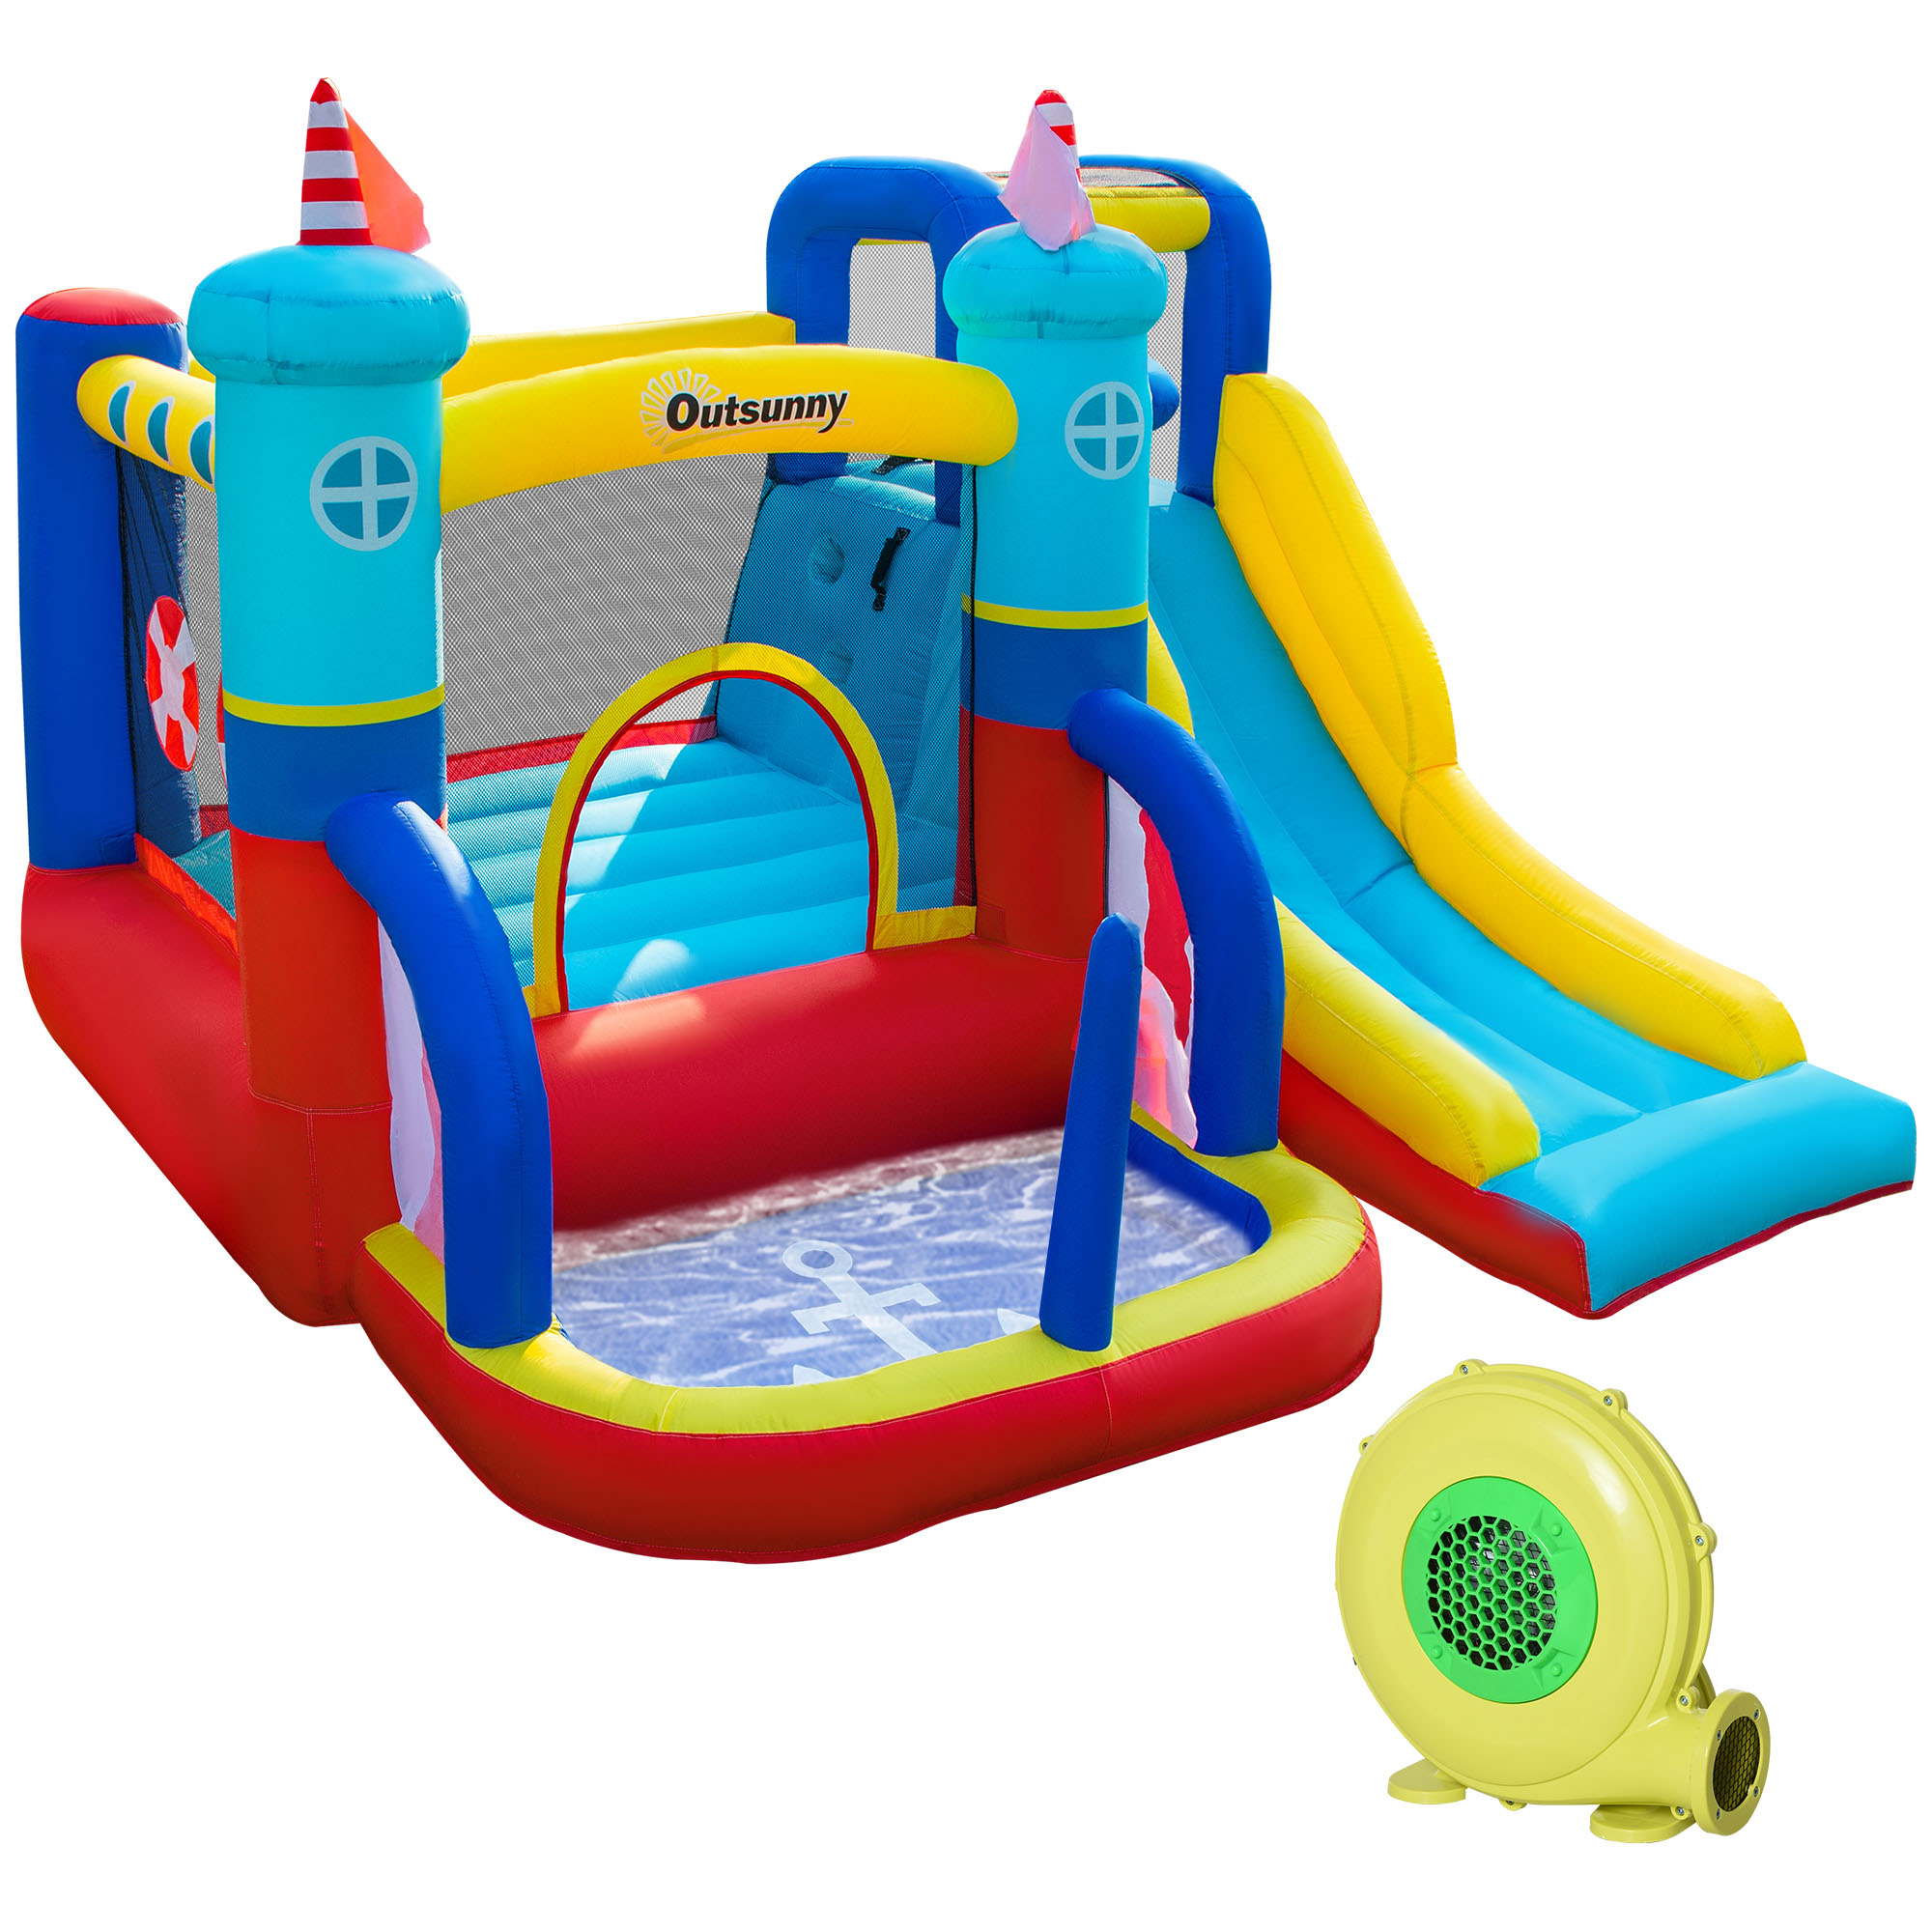 Outsunny 4-σε-1 Bouncy Castle για παιδιά 3-8 ετών